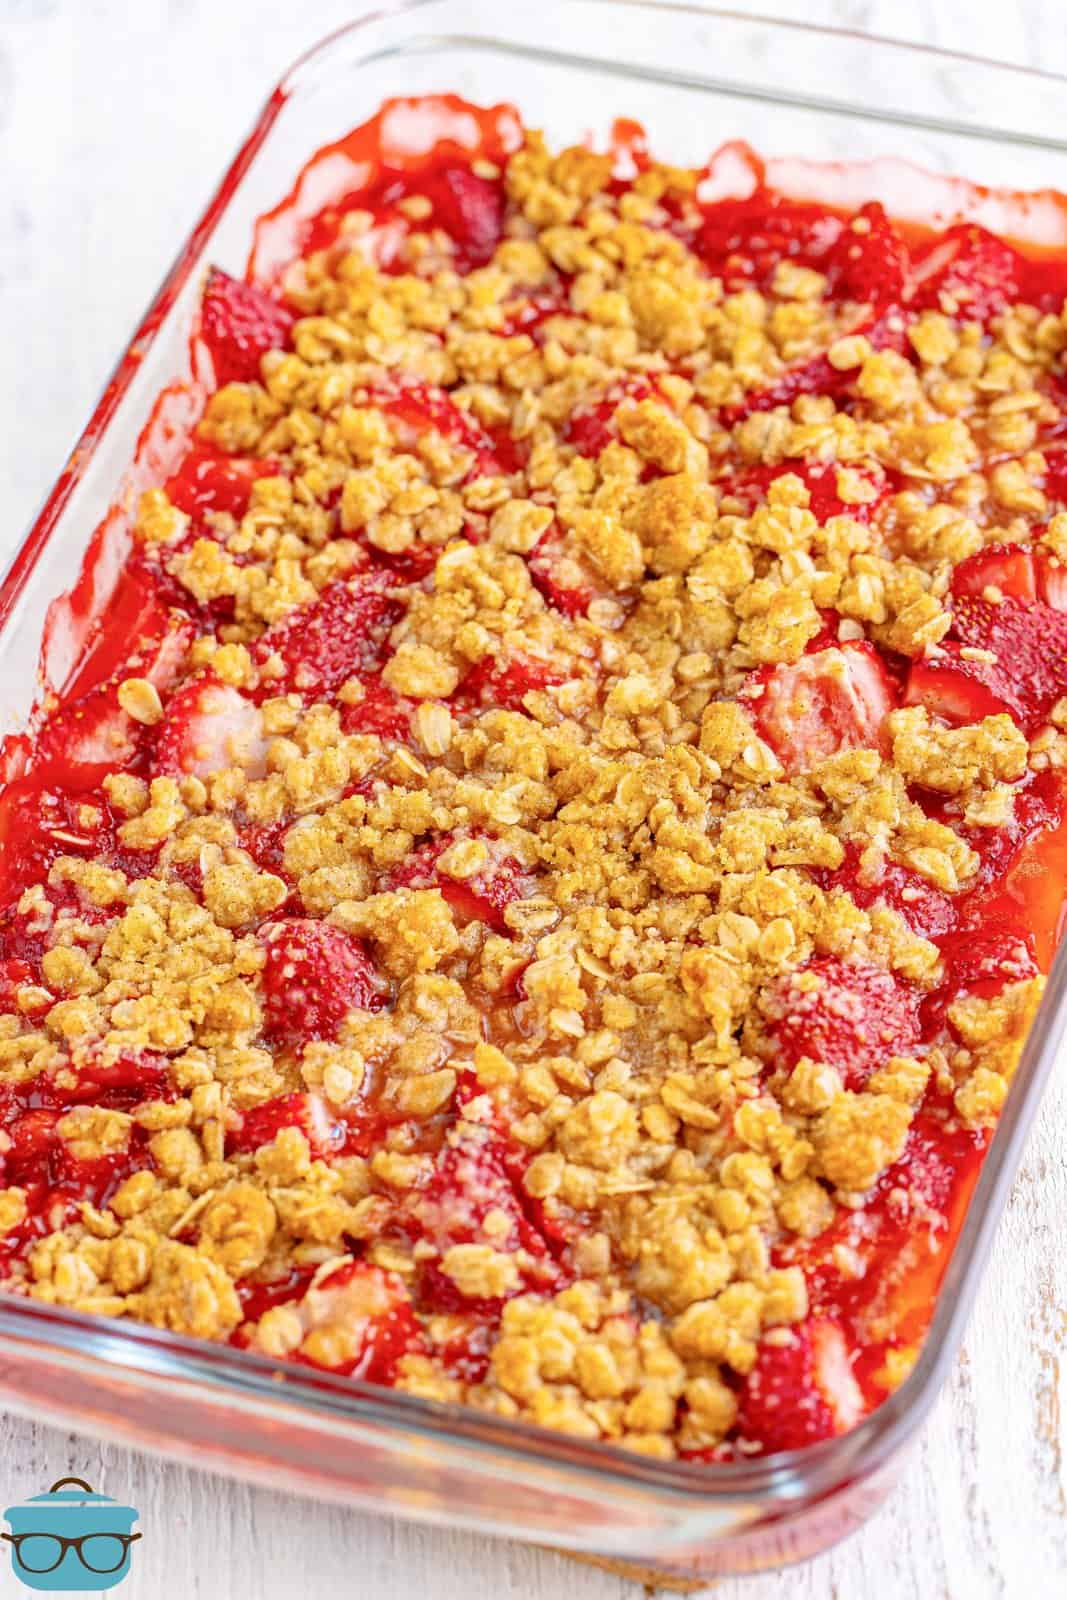 A baking dish of fresh made Strawberry Crumble.